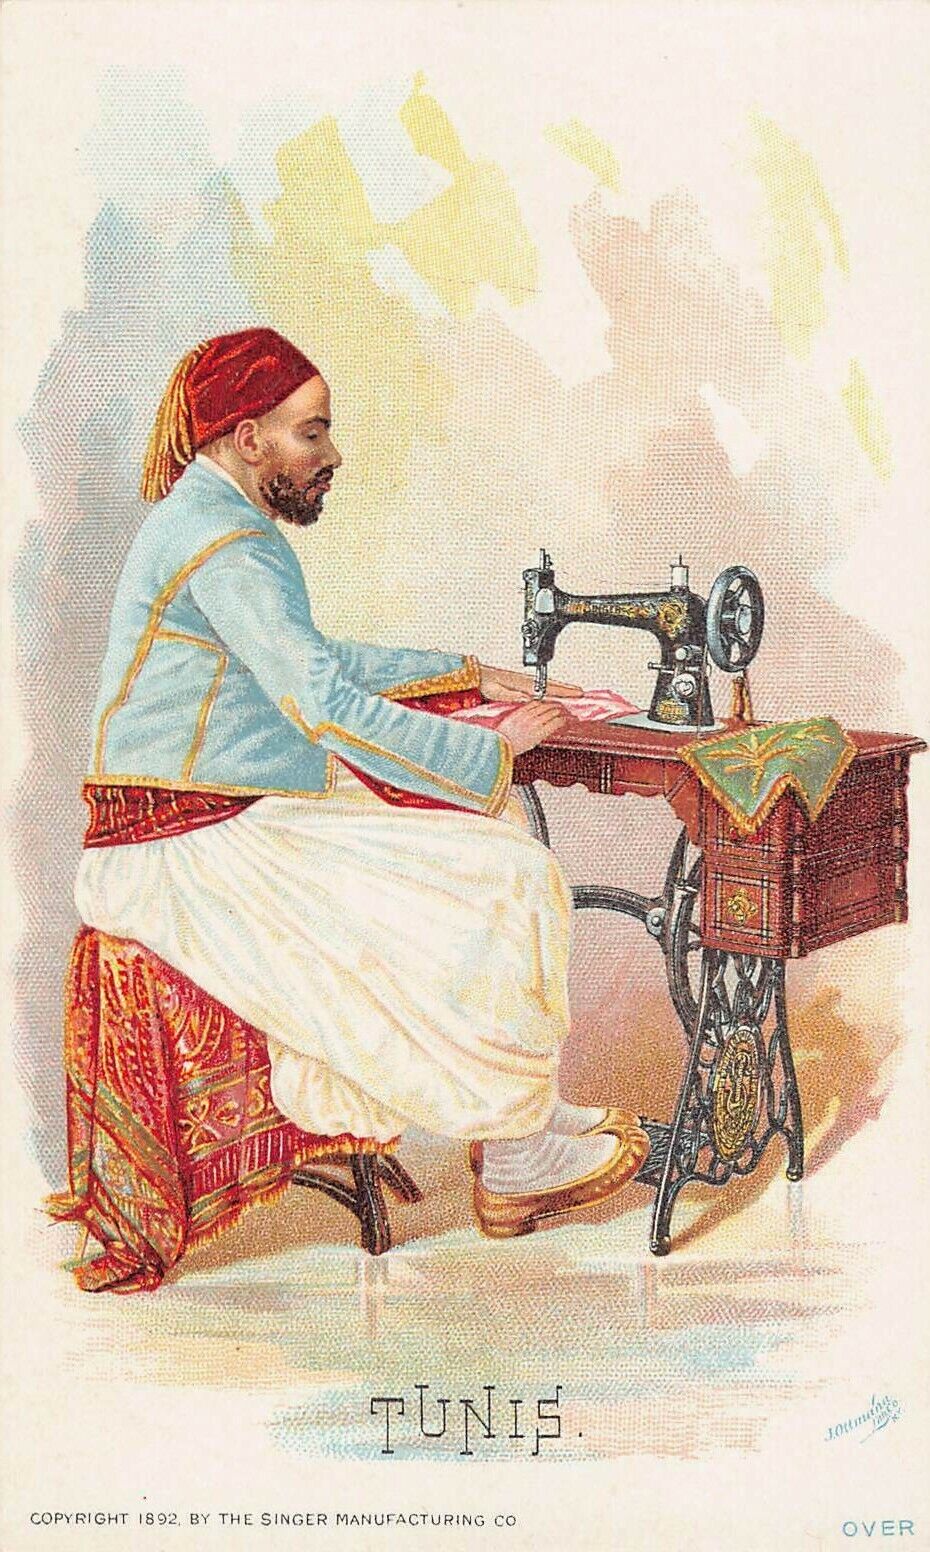 Tunisia, Singer Sewing Machine Co., 1892 Trade Card, Size: 132 mm x 80 mm